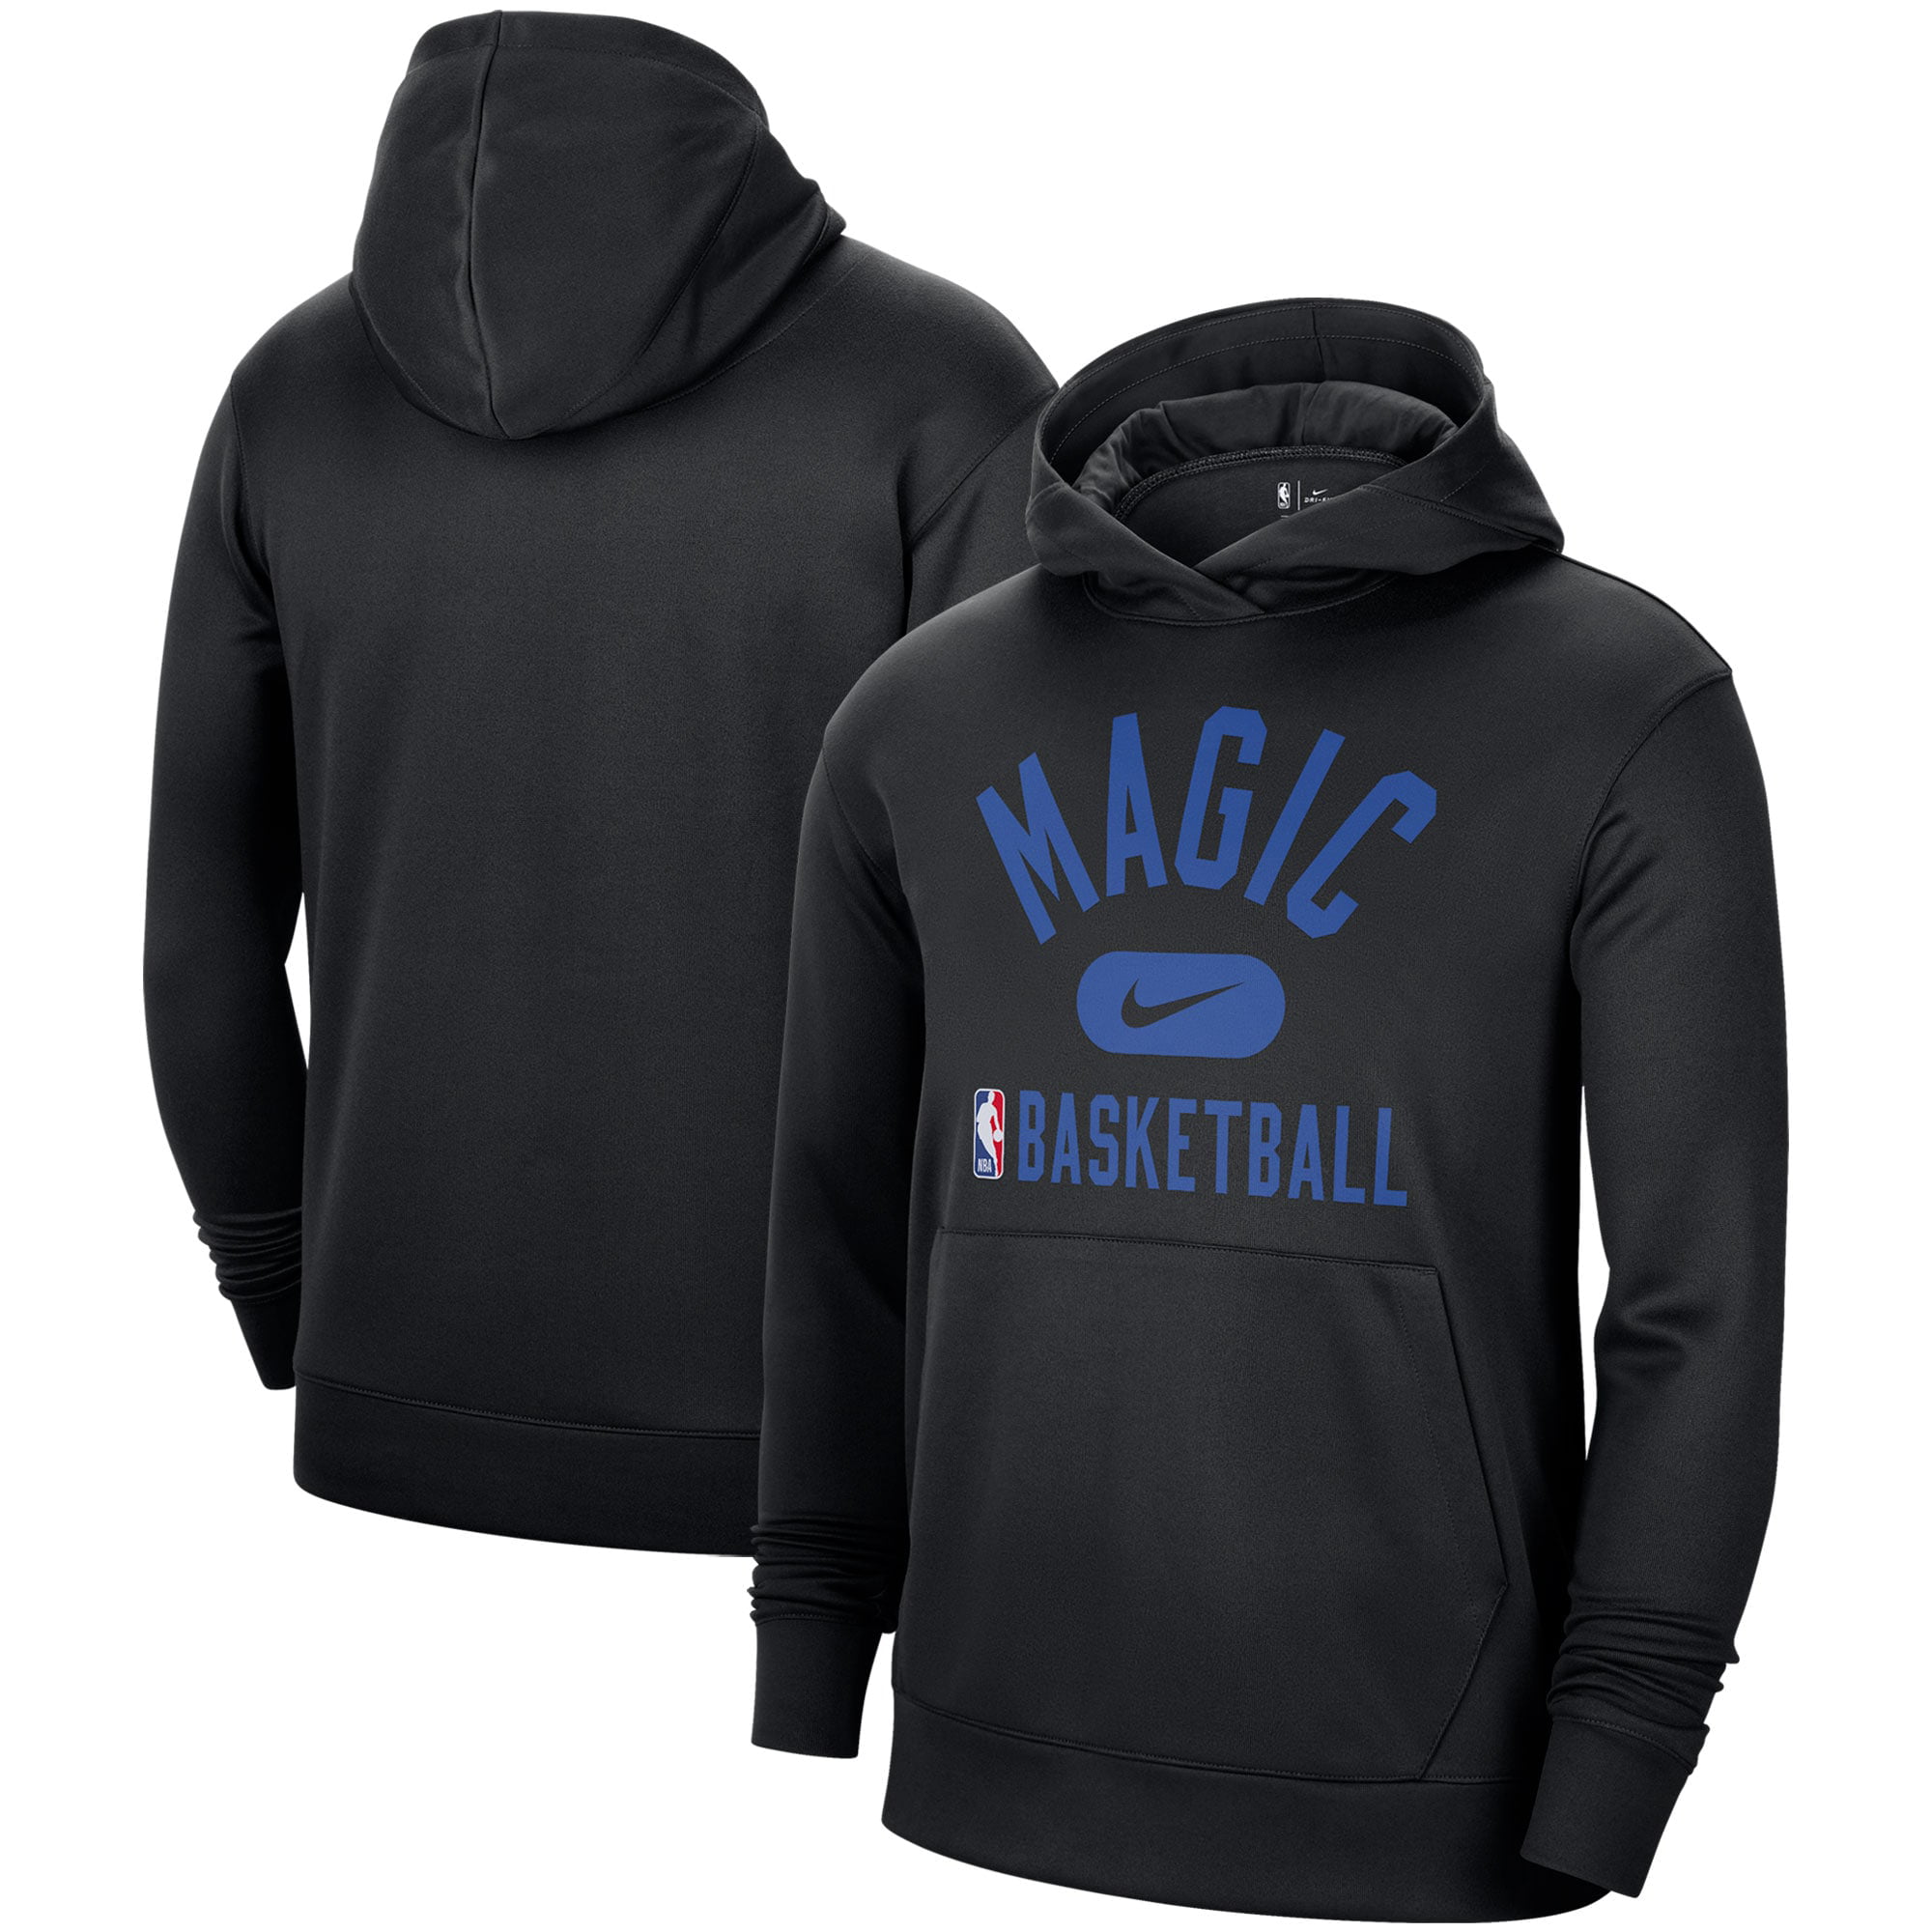 Color : A, Size : S LXYFMS Hooded Pullover Orlando Magic Basketball Training Men and Women Jogging Loose Breathable Long Sleeve Sports Jacket Hoodie Sweatshirt 